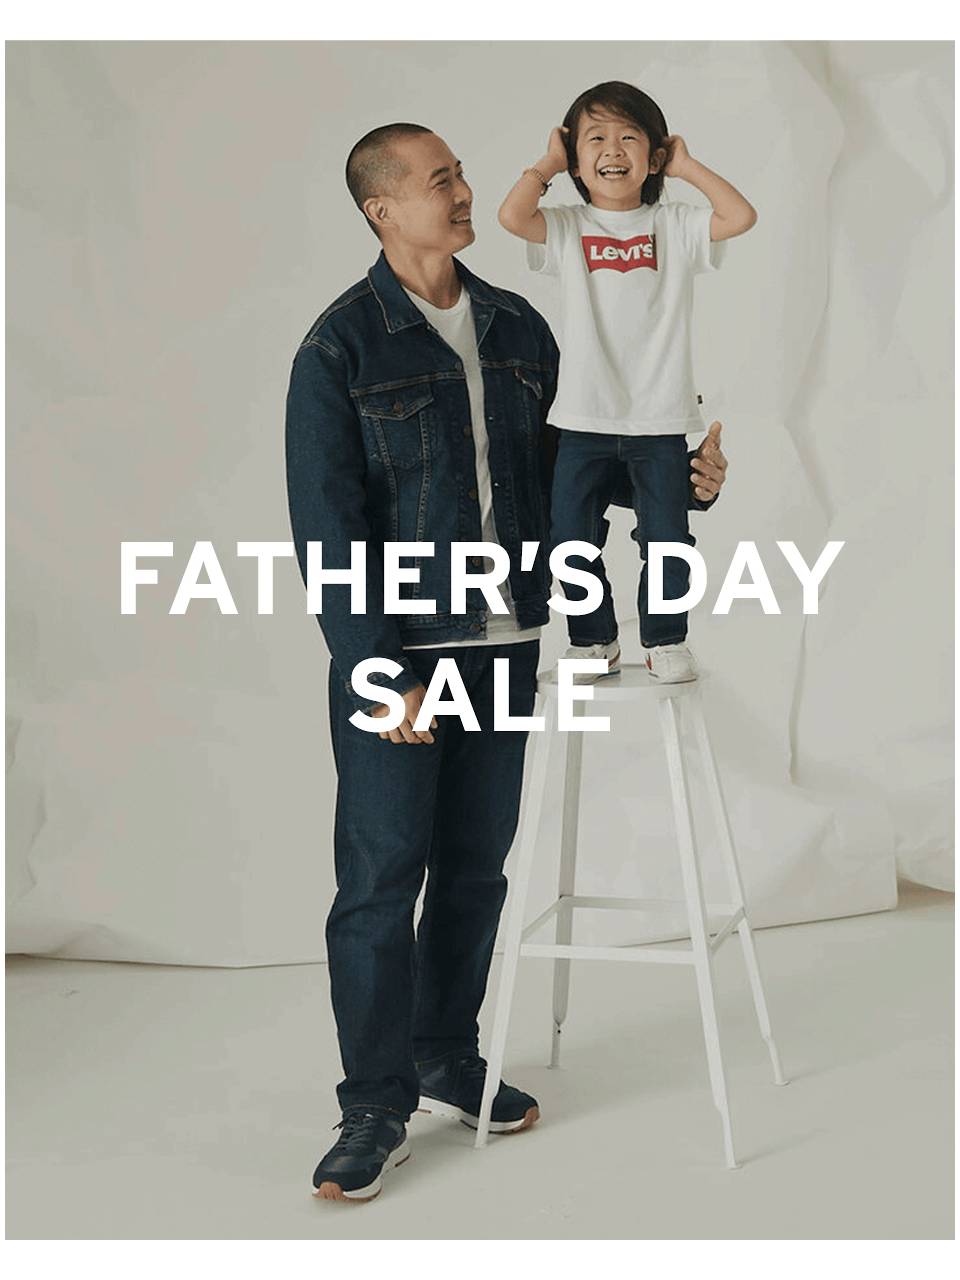 Image of Father's day promo.